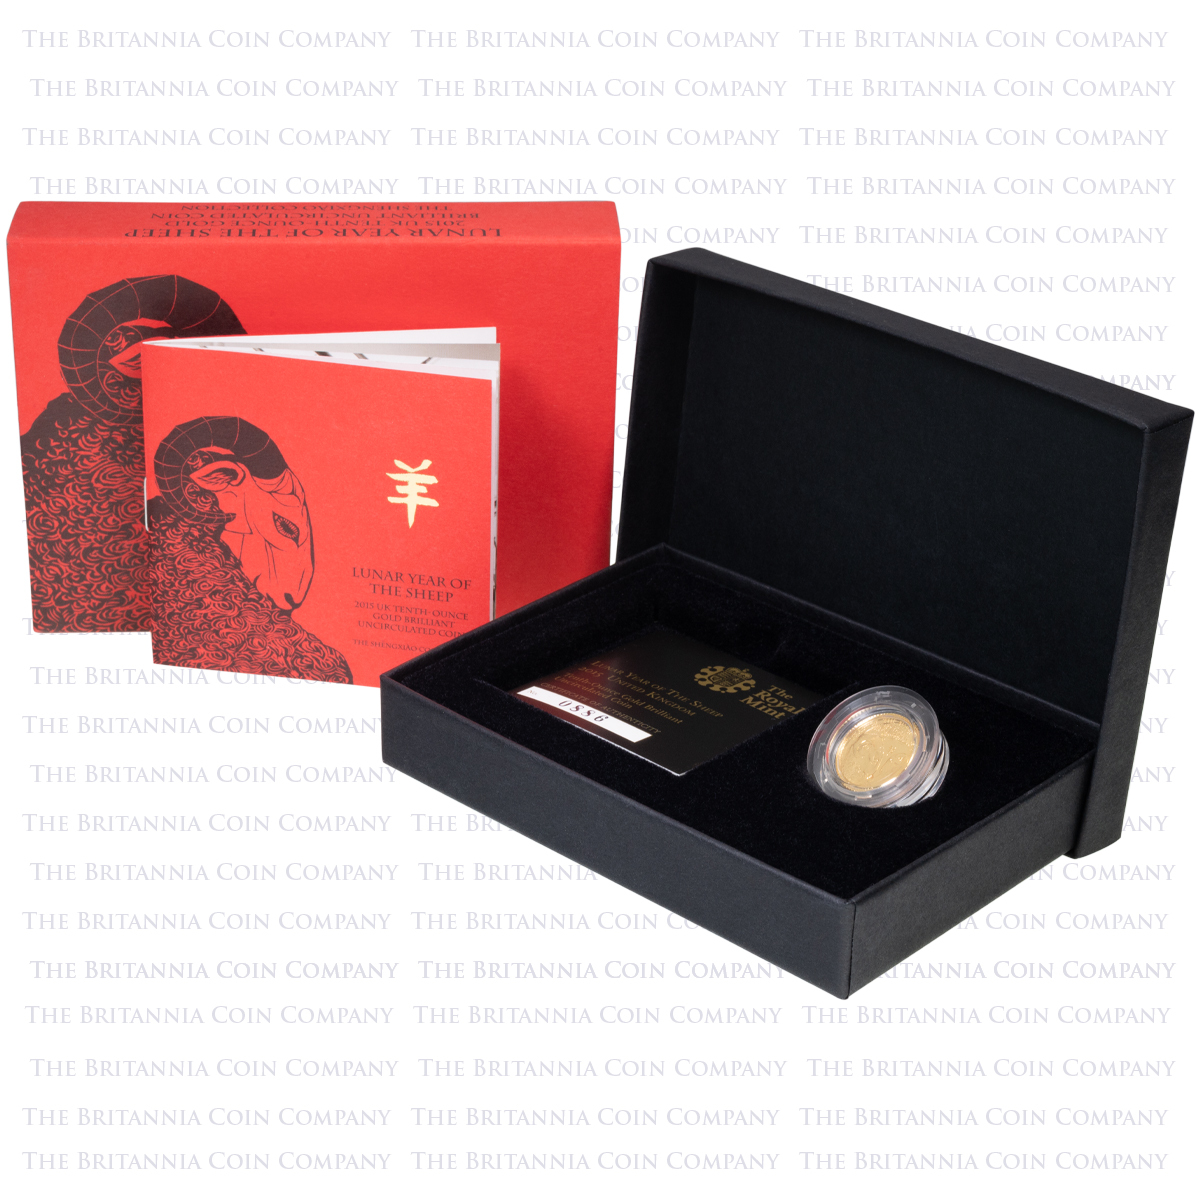 UKH15GT 2015 Lunar Year Of The Sheep Tenth Ounce Gold Brilliant Uncirculated Coin Boxed